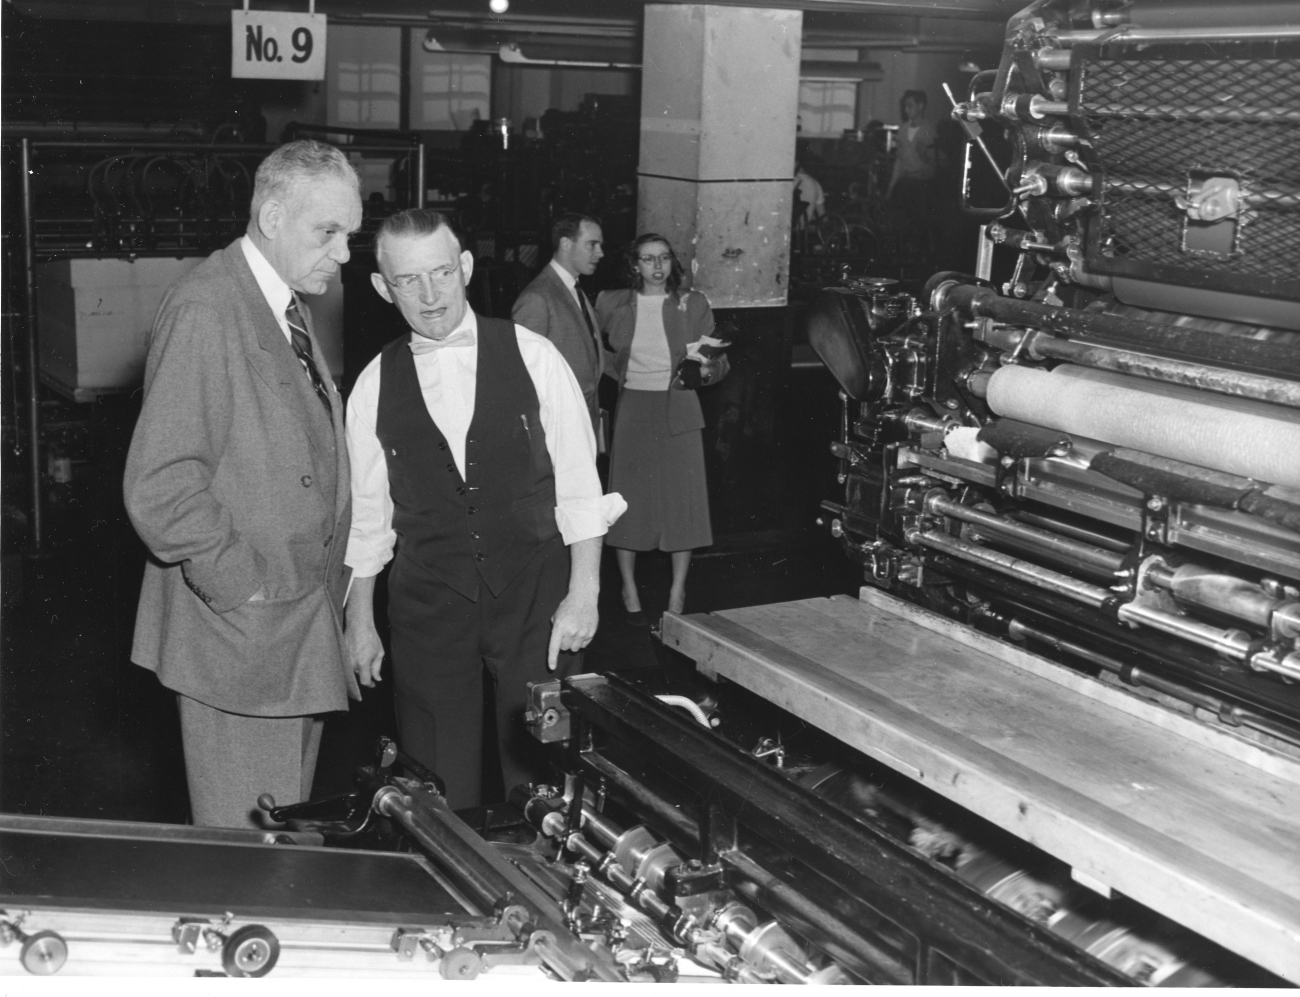 Congressman Campbell of Florida being briefed on printing process by Thomas Shea